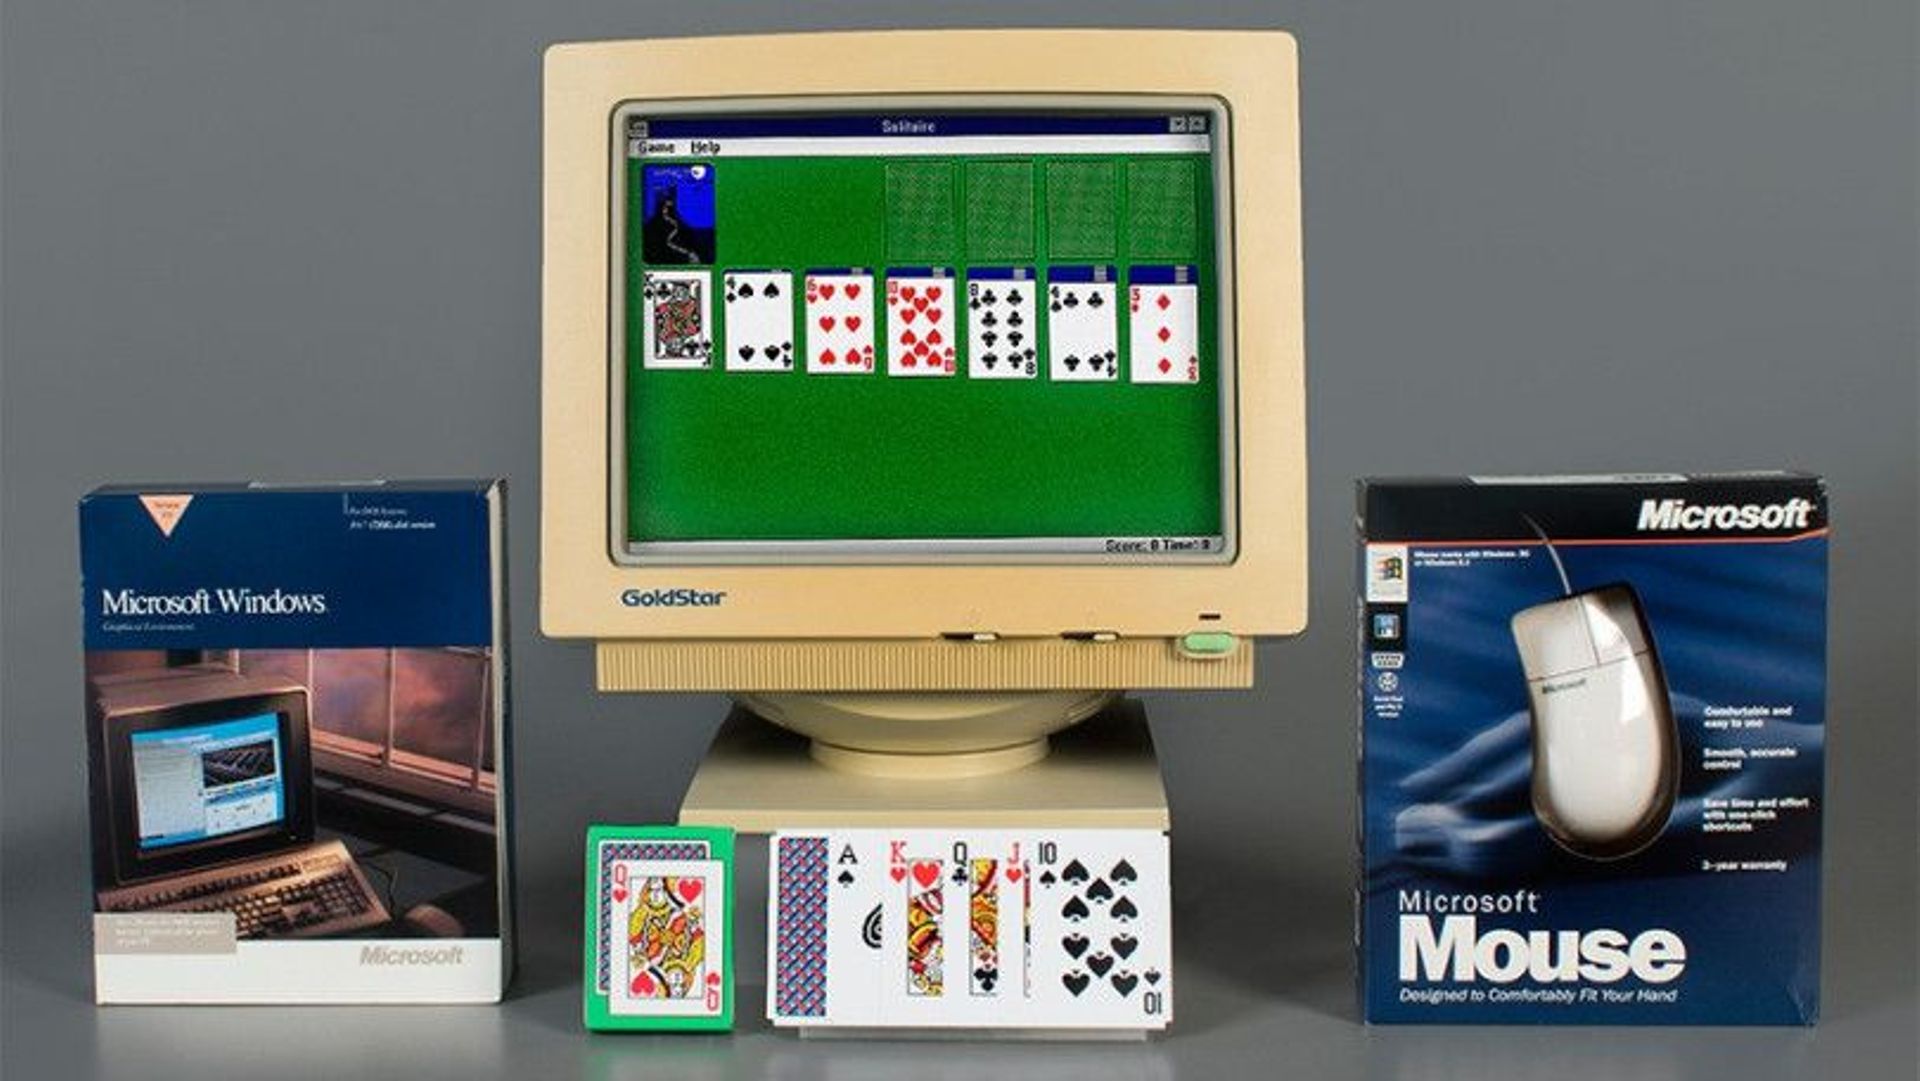 Le World Video Game Hall of Fame accueille le Solitaire de Microsoft